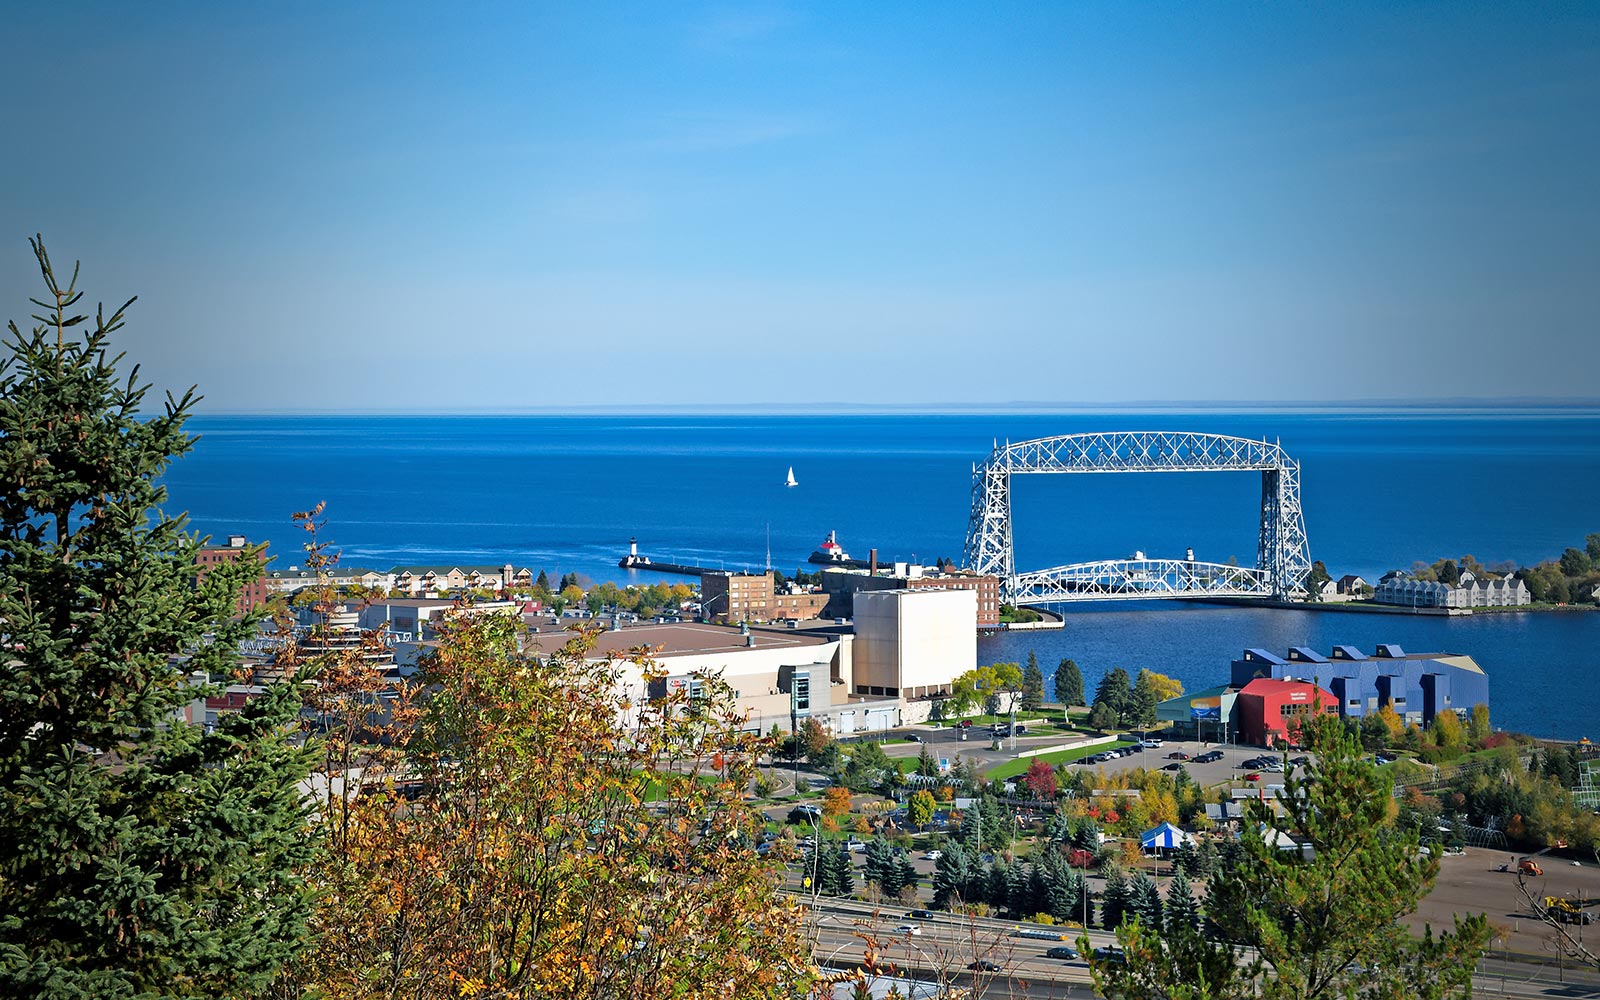 3 great reasons the aerial lift bridge is worth walking over to canal park this summerthis summer